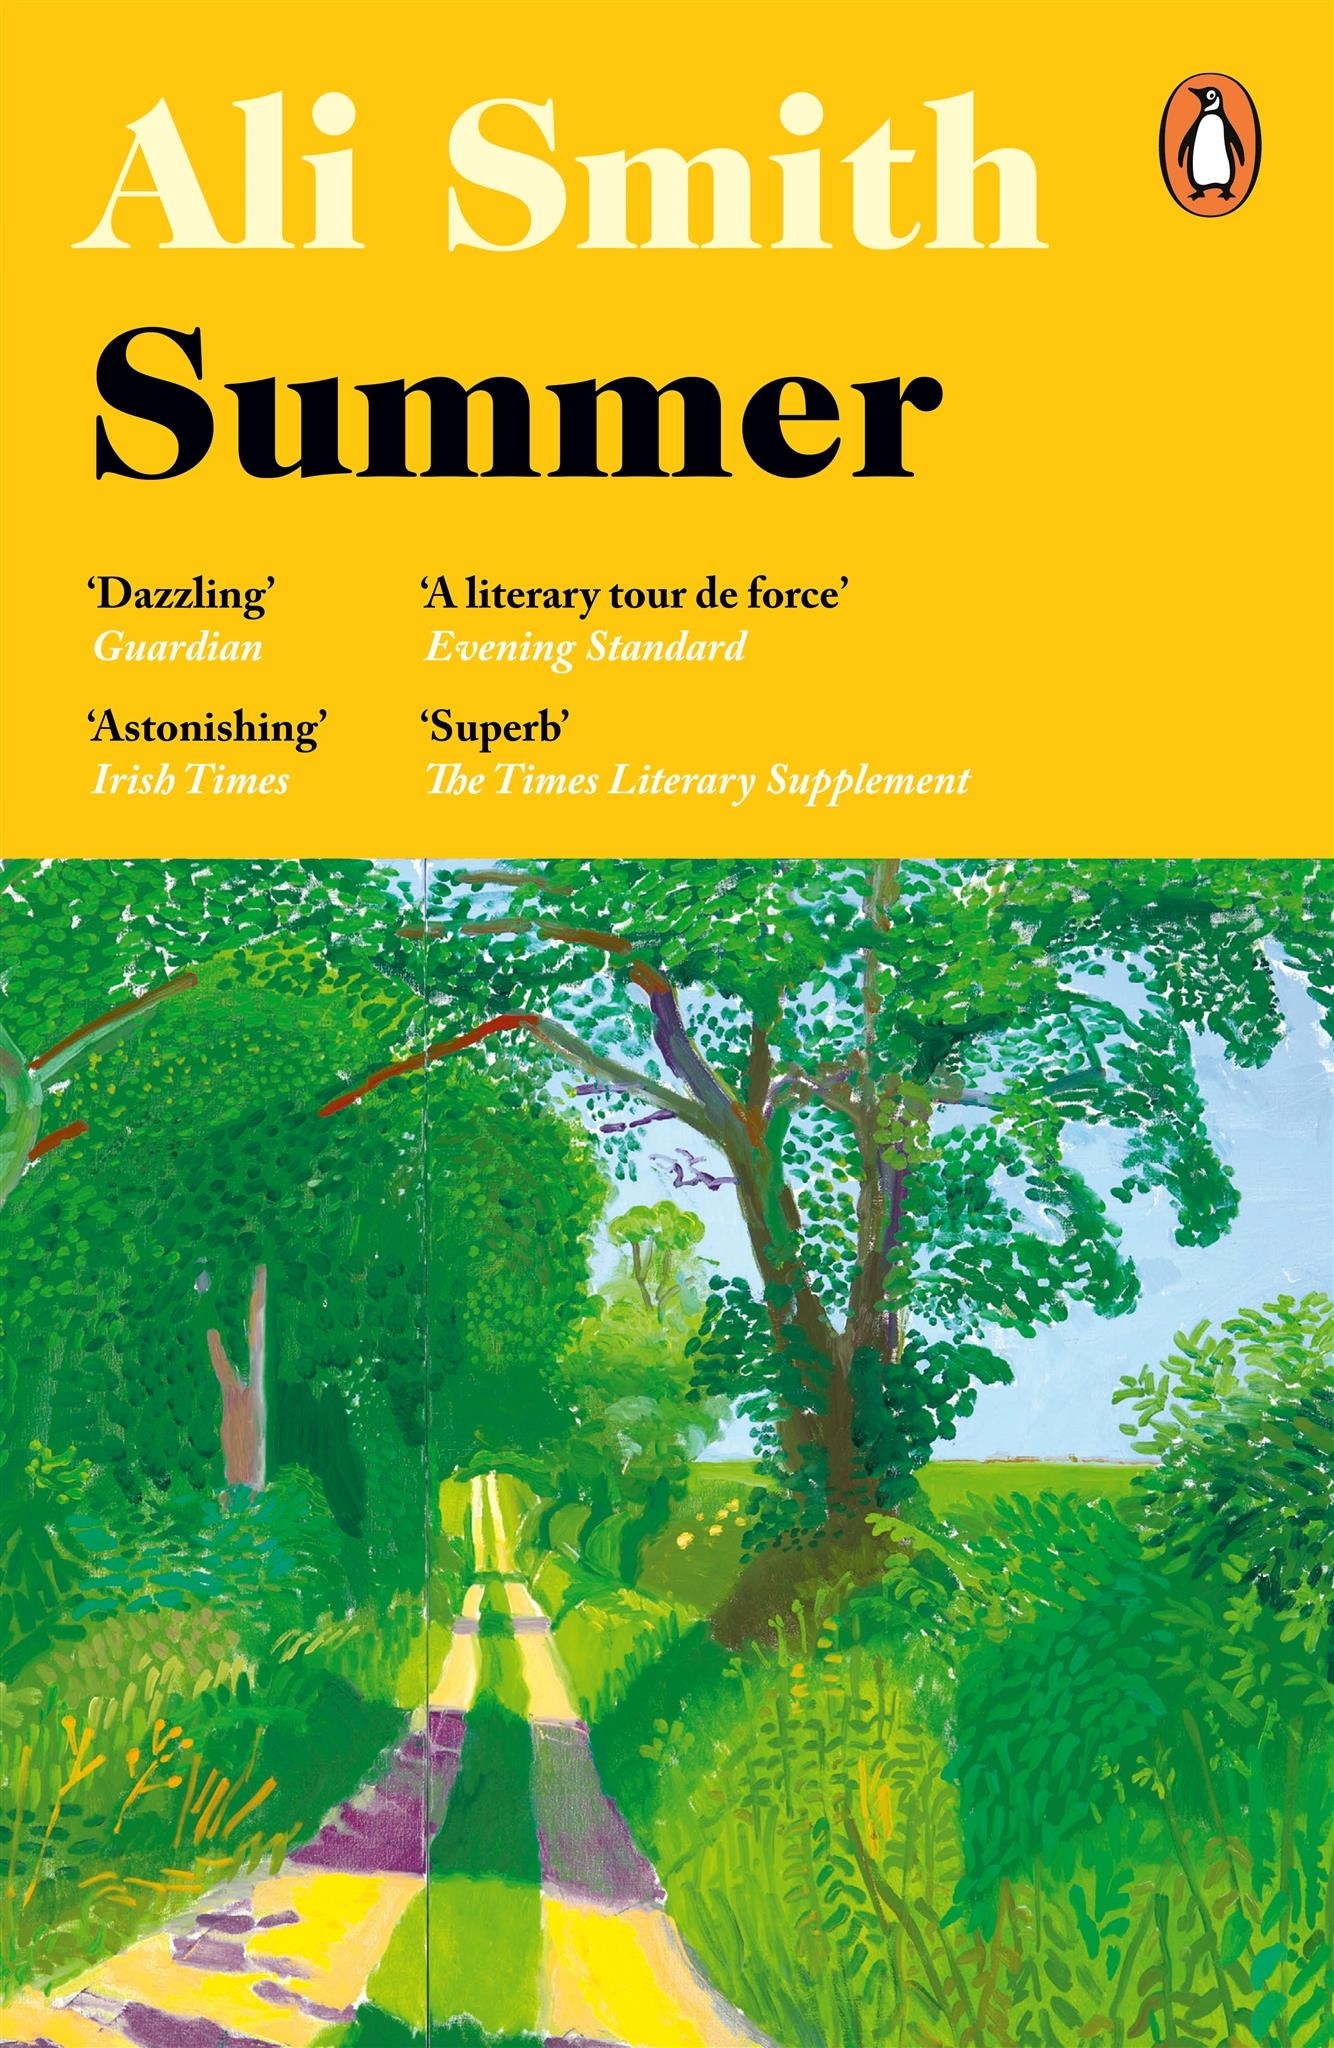 Book “Summer” by Ali Smith — May 6, 2021